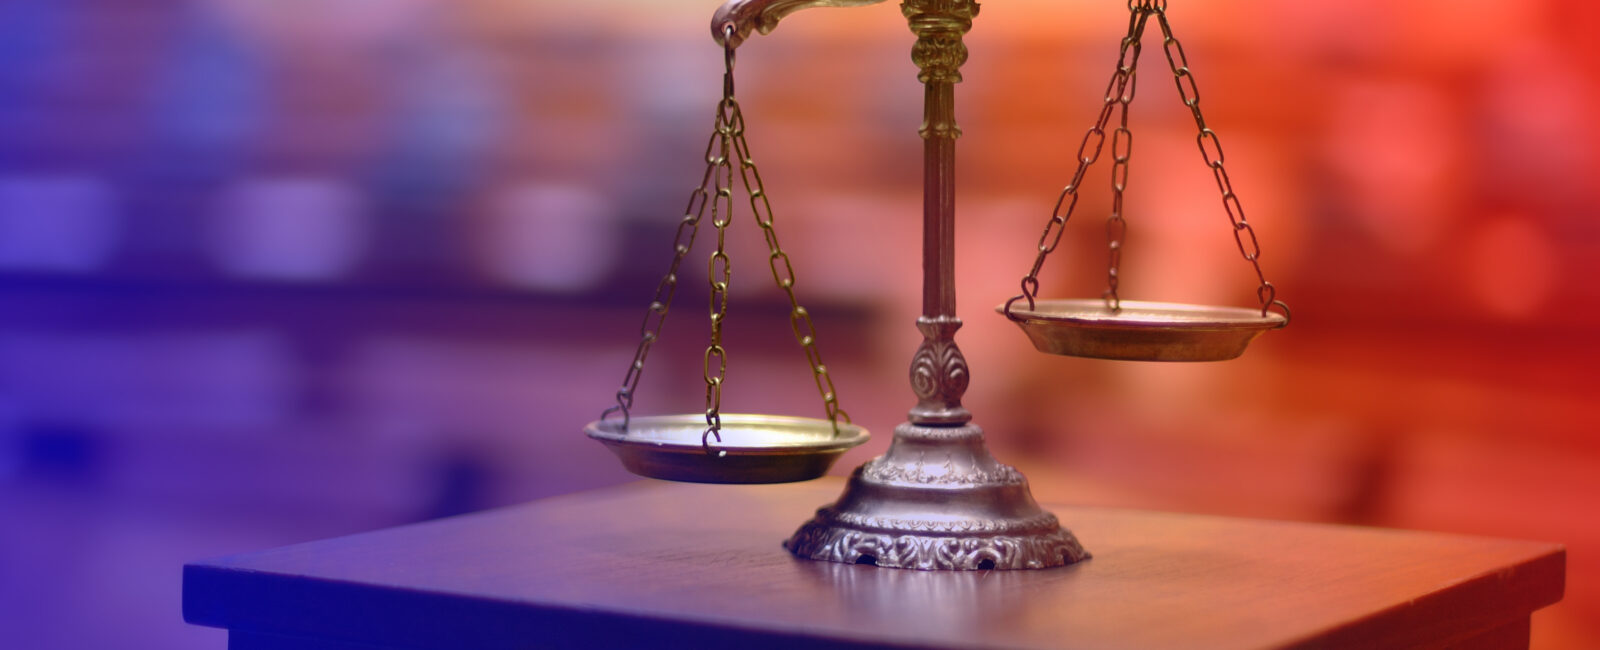 Composite image of weighing scales (scales of justice) against a blurred courtroom background